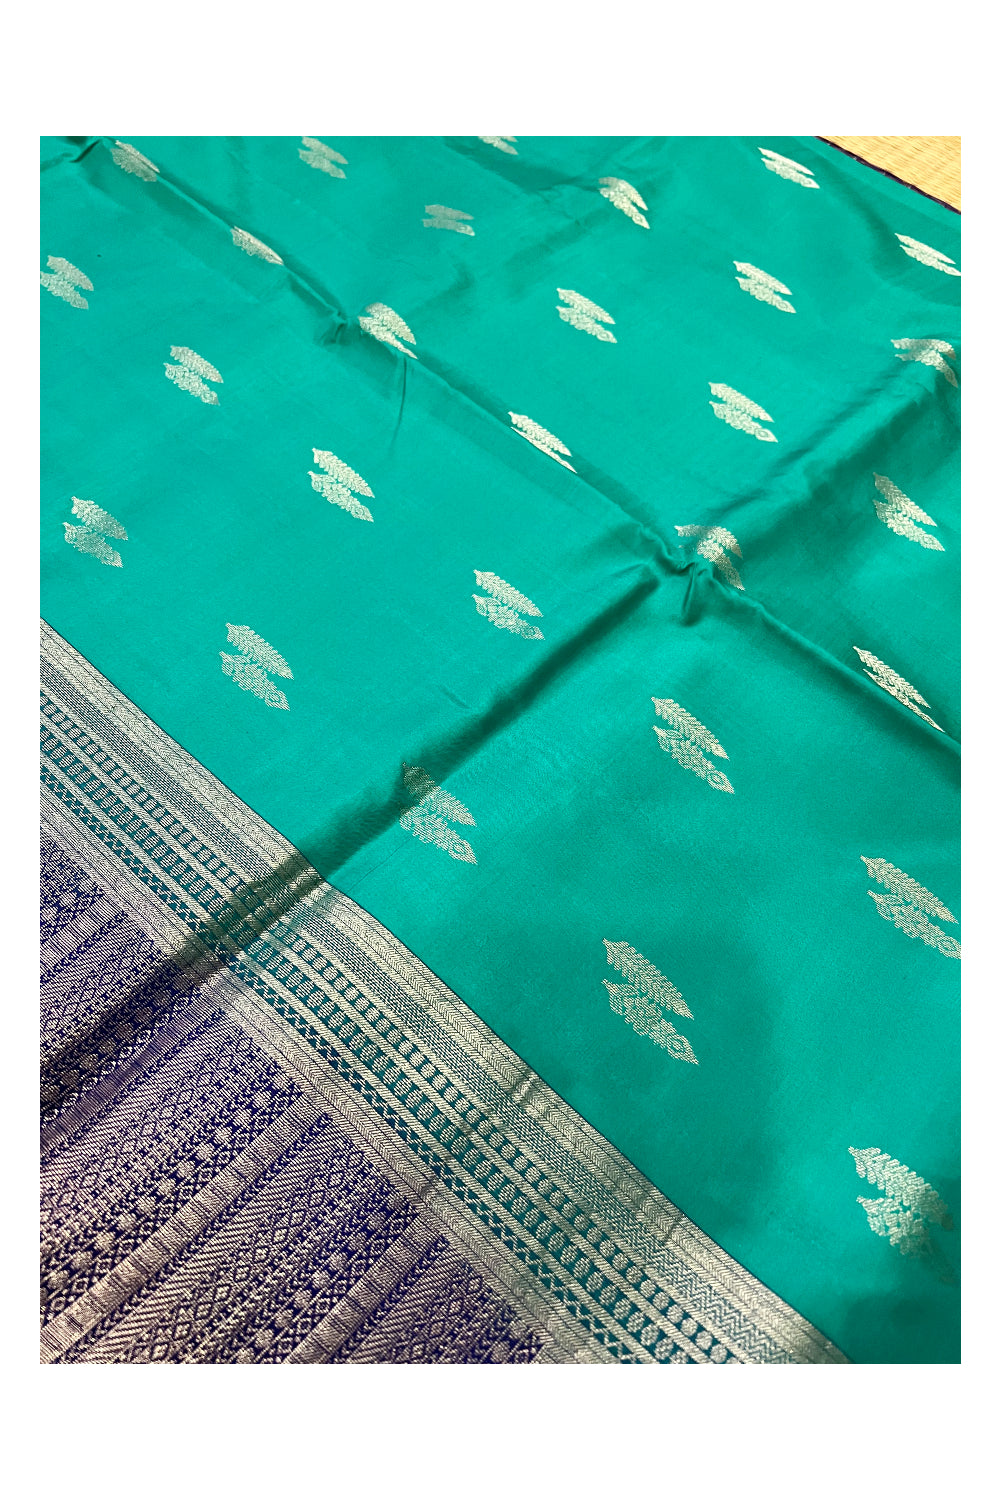 Southloom Handloom Pure Silk Kanchipuram Saree with Green Body and Navy Blue Blouse Piece